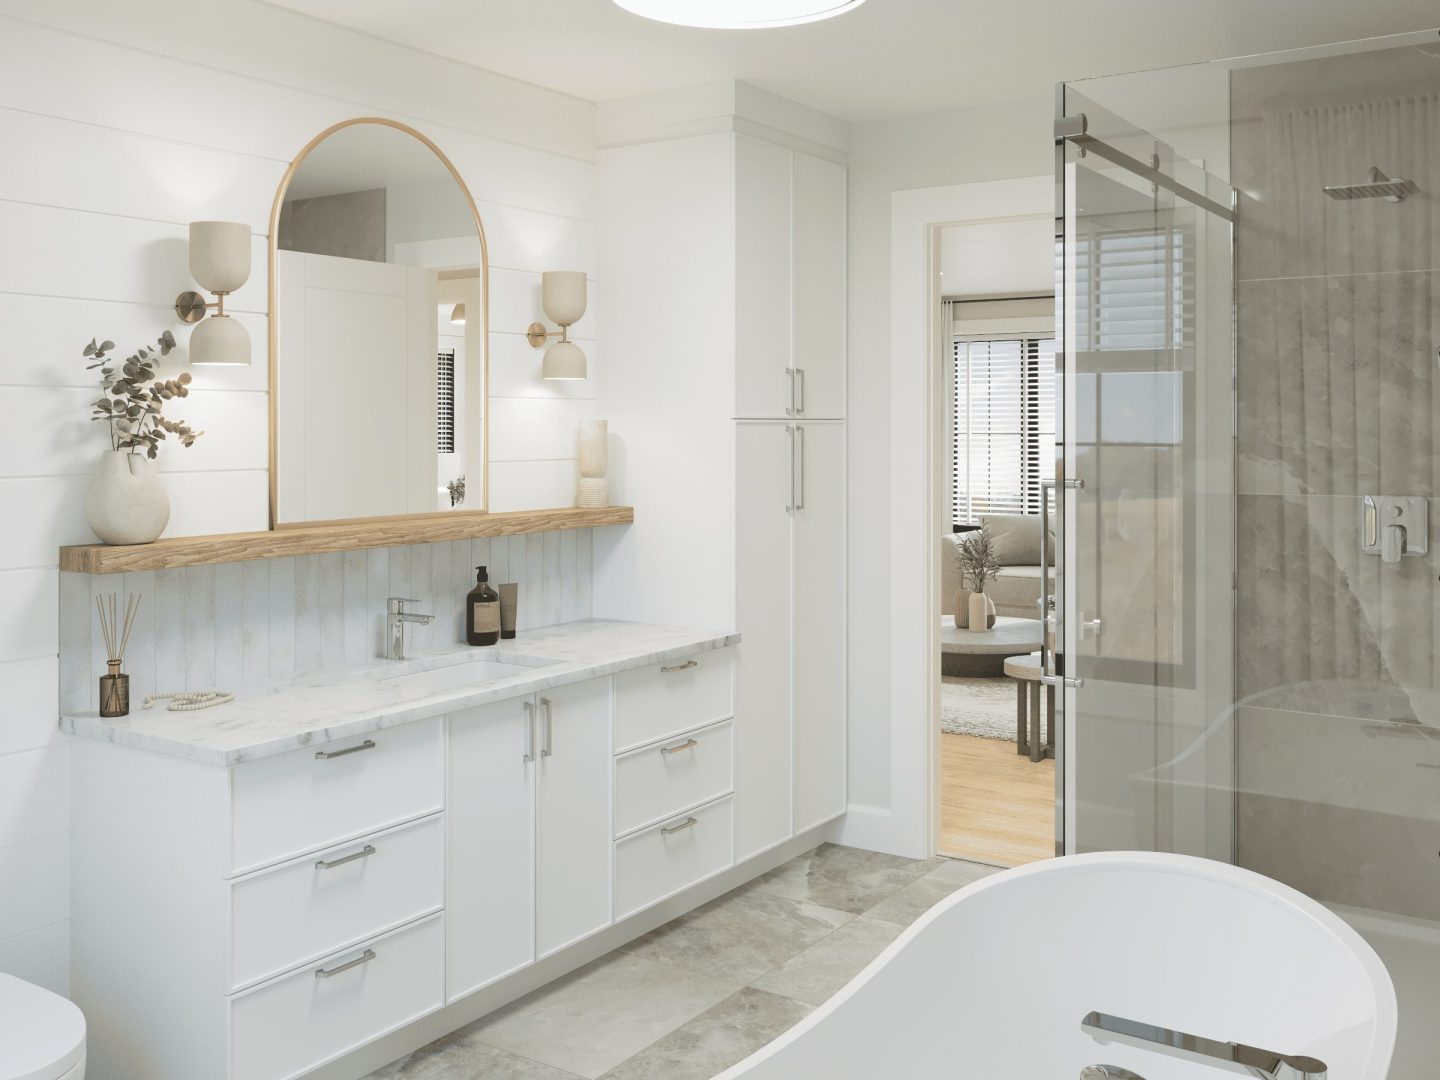 The Léa model is a contemporary-style bungalow. View of the bathroom.